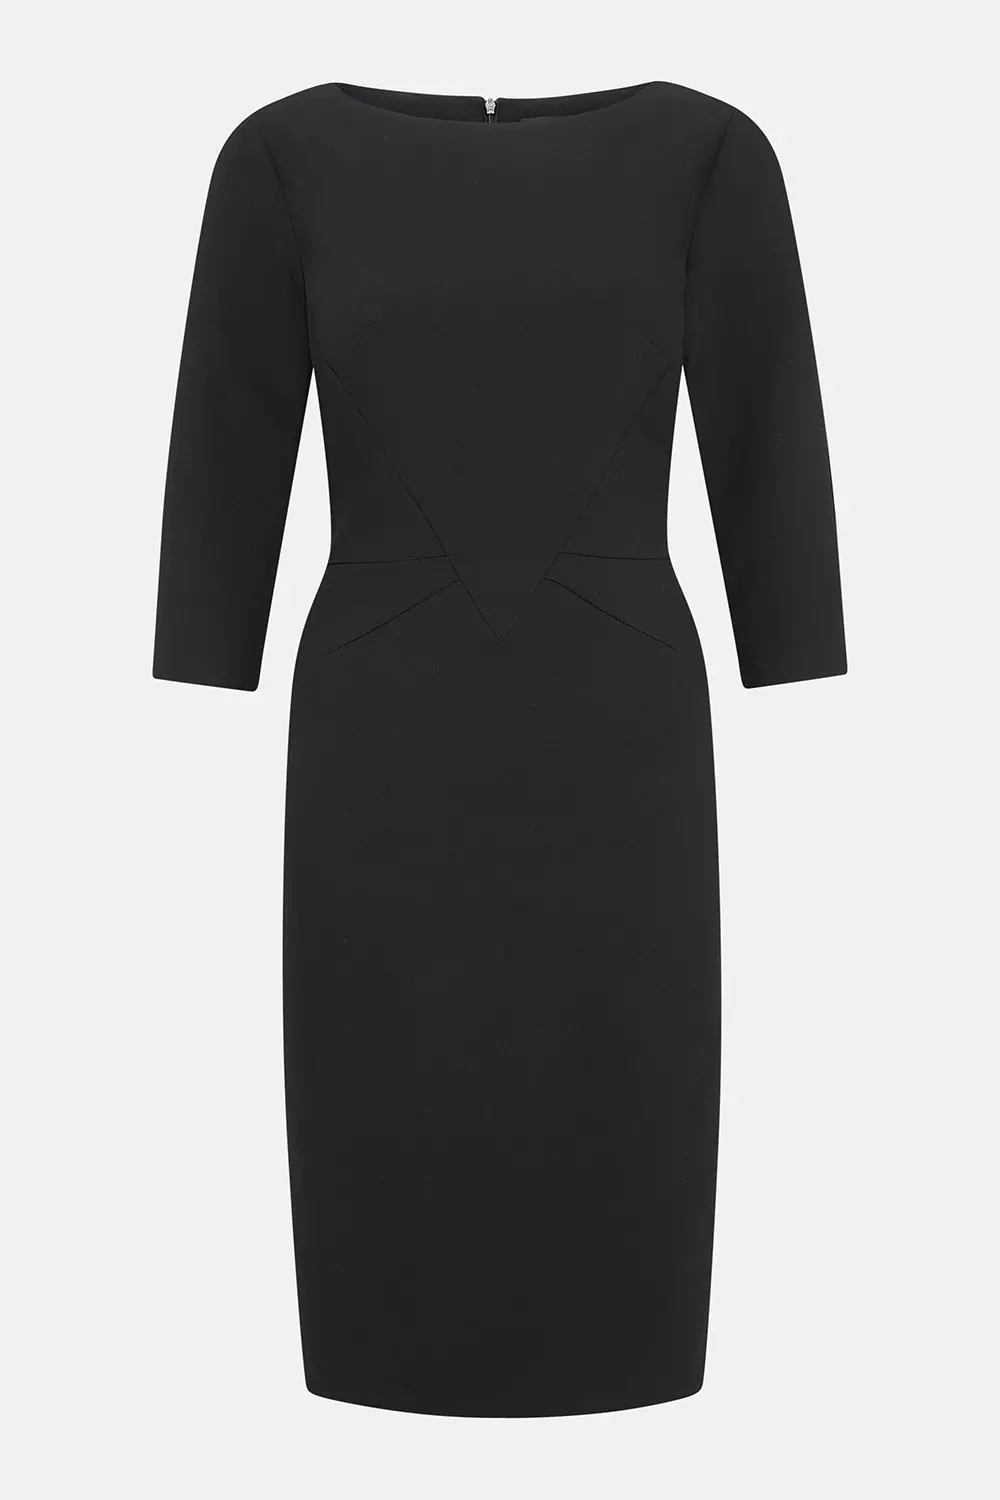 PETITE 3/4 Sleeve Tailored Dress, M&S Collection